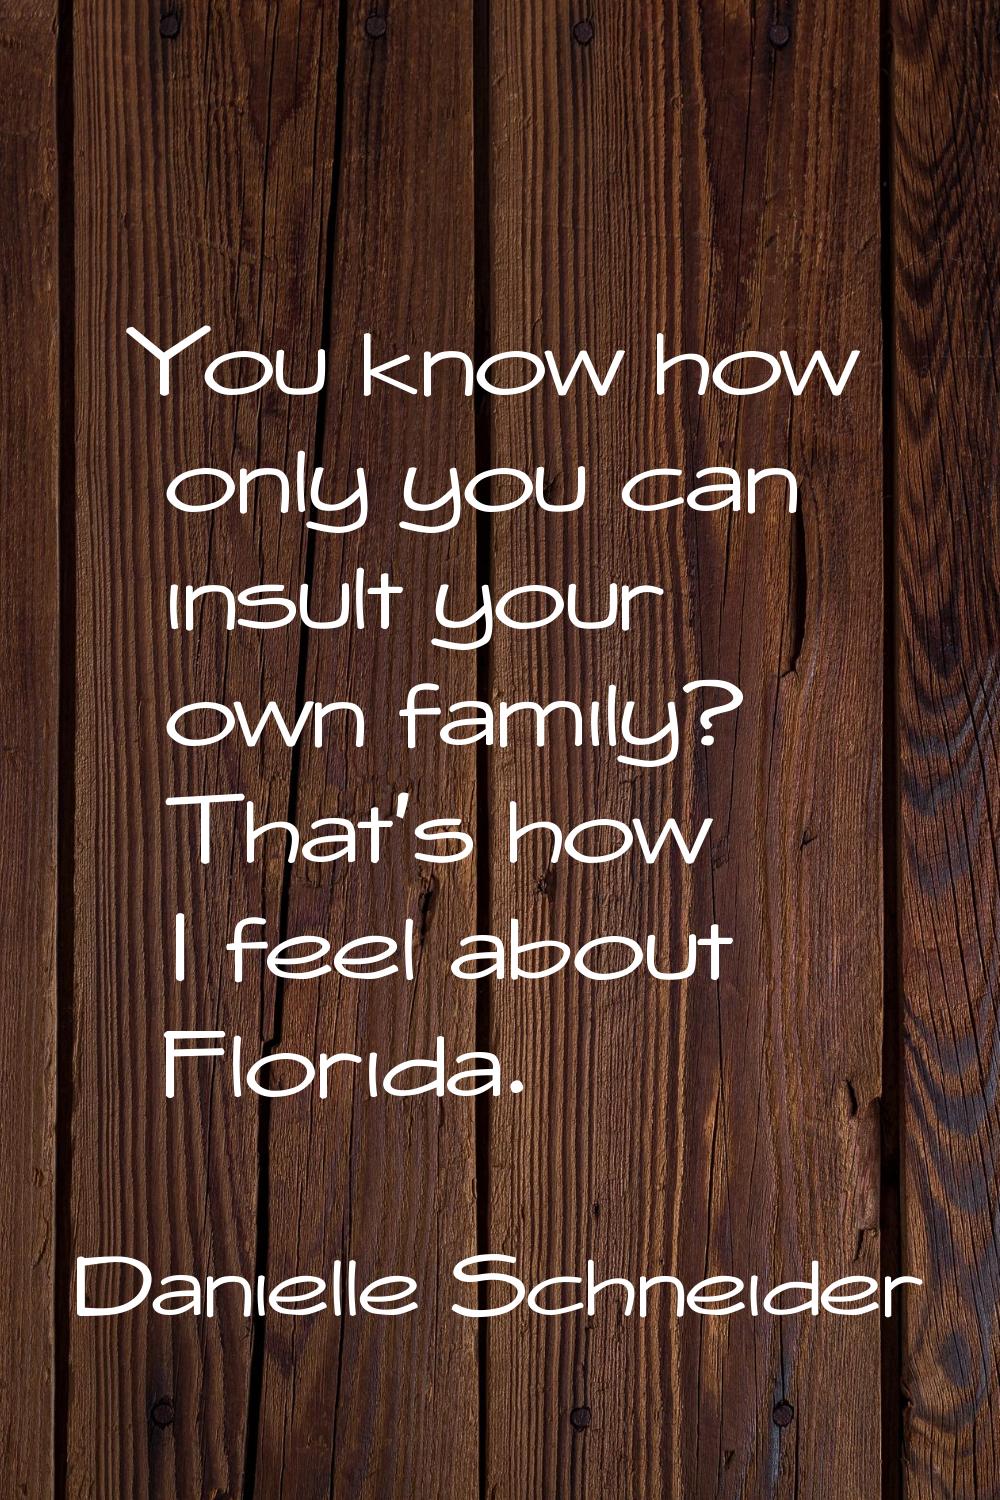 You know how only you can insult your own family? That's how I feel about Florida.